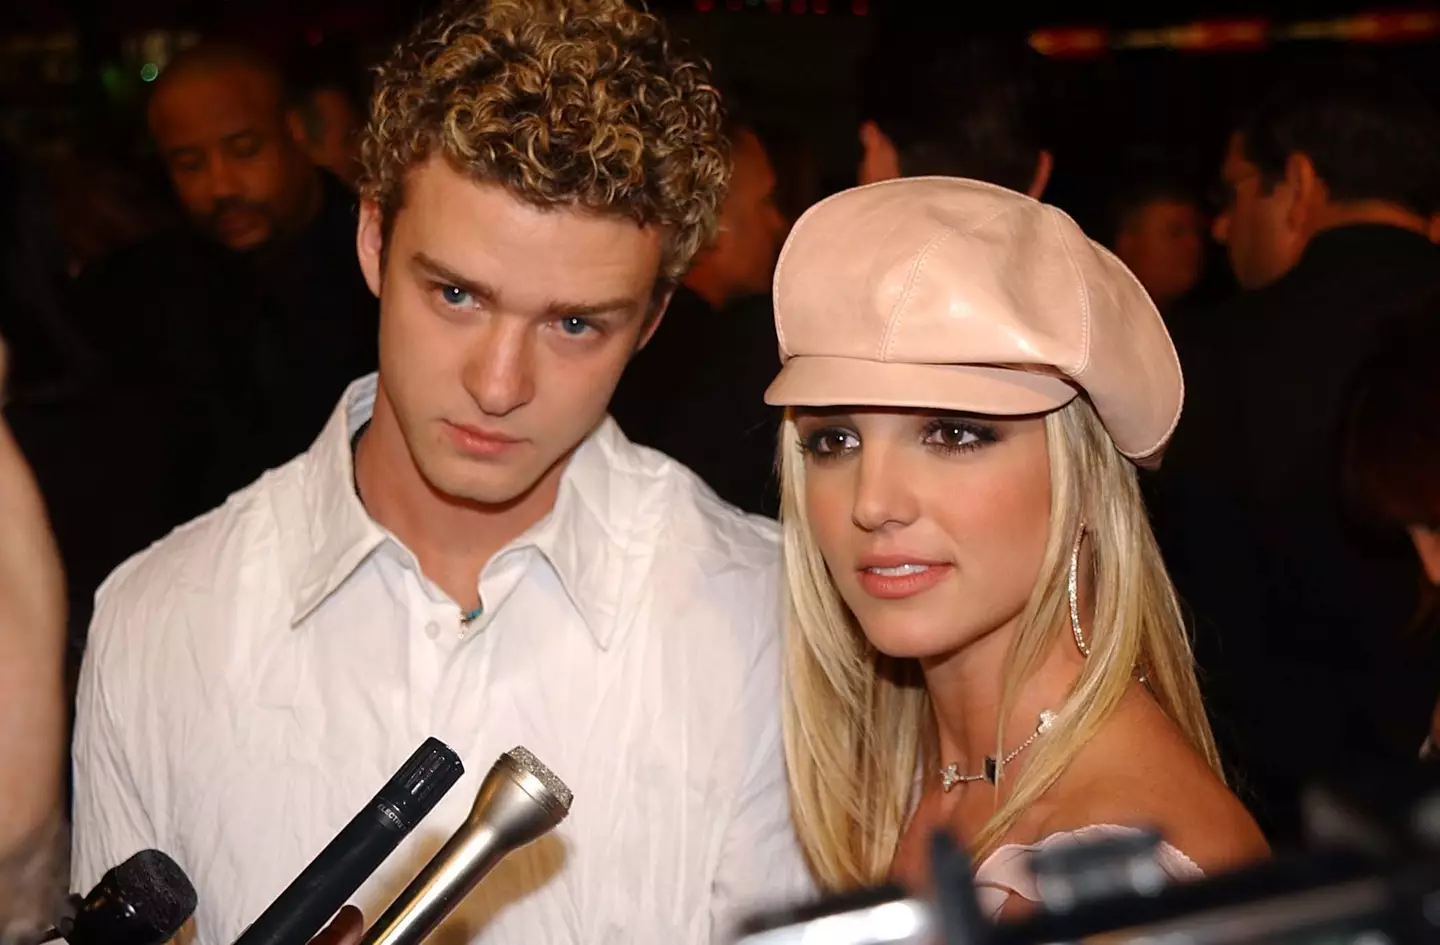 Britney Spears' memoir was particularly damning to her former partner, Justin Timberlake.